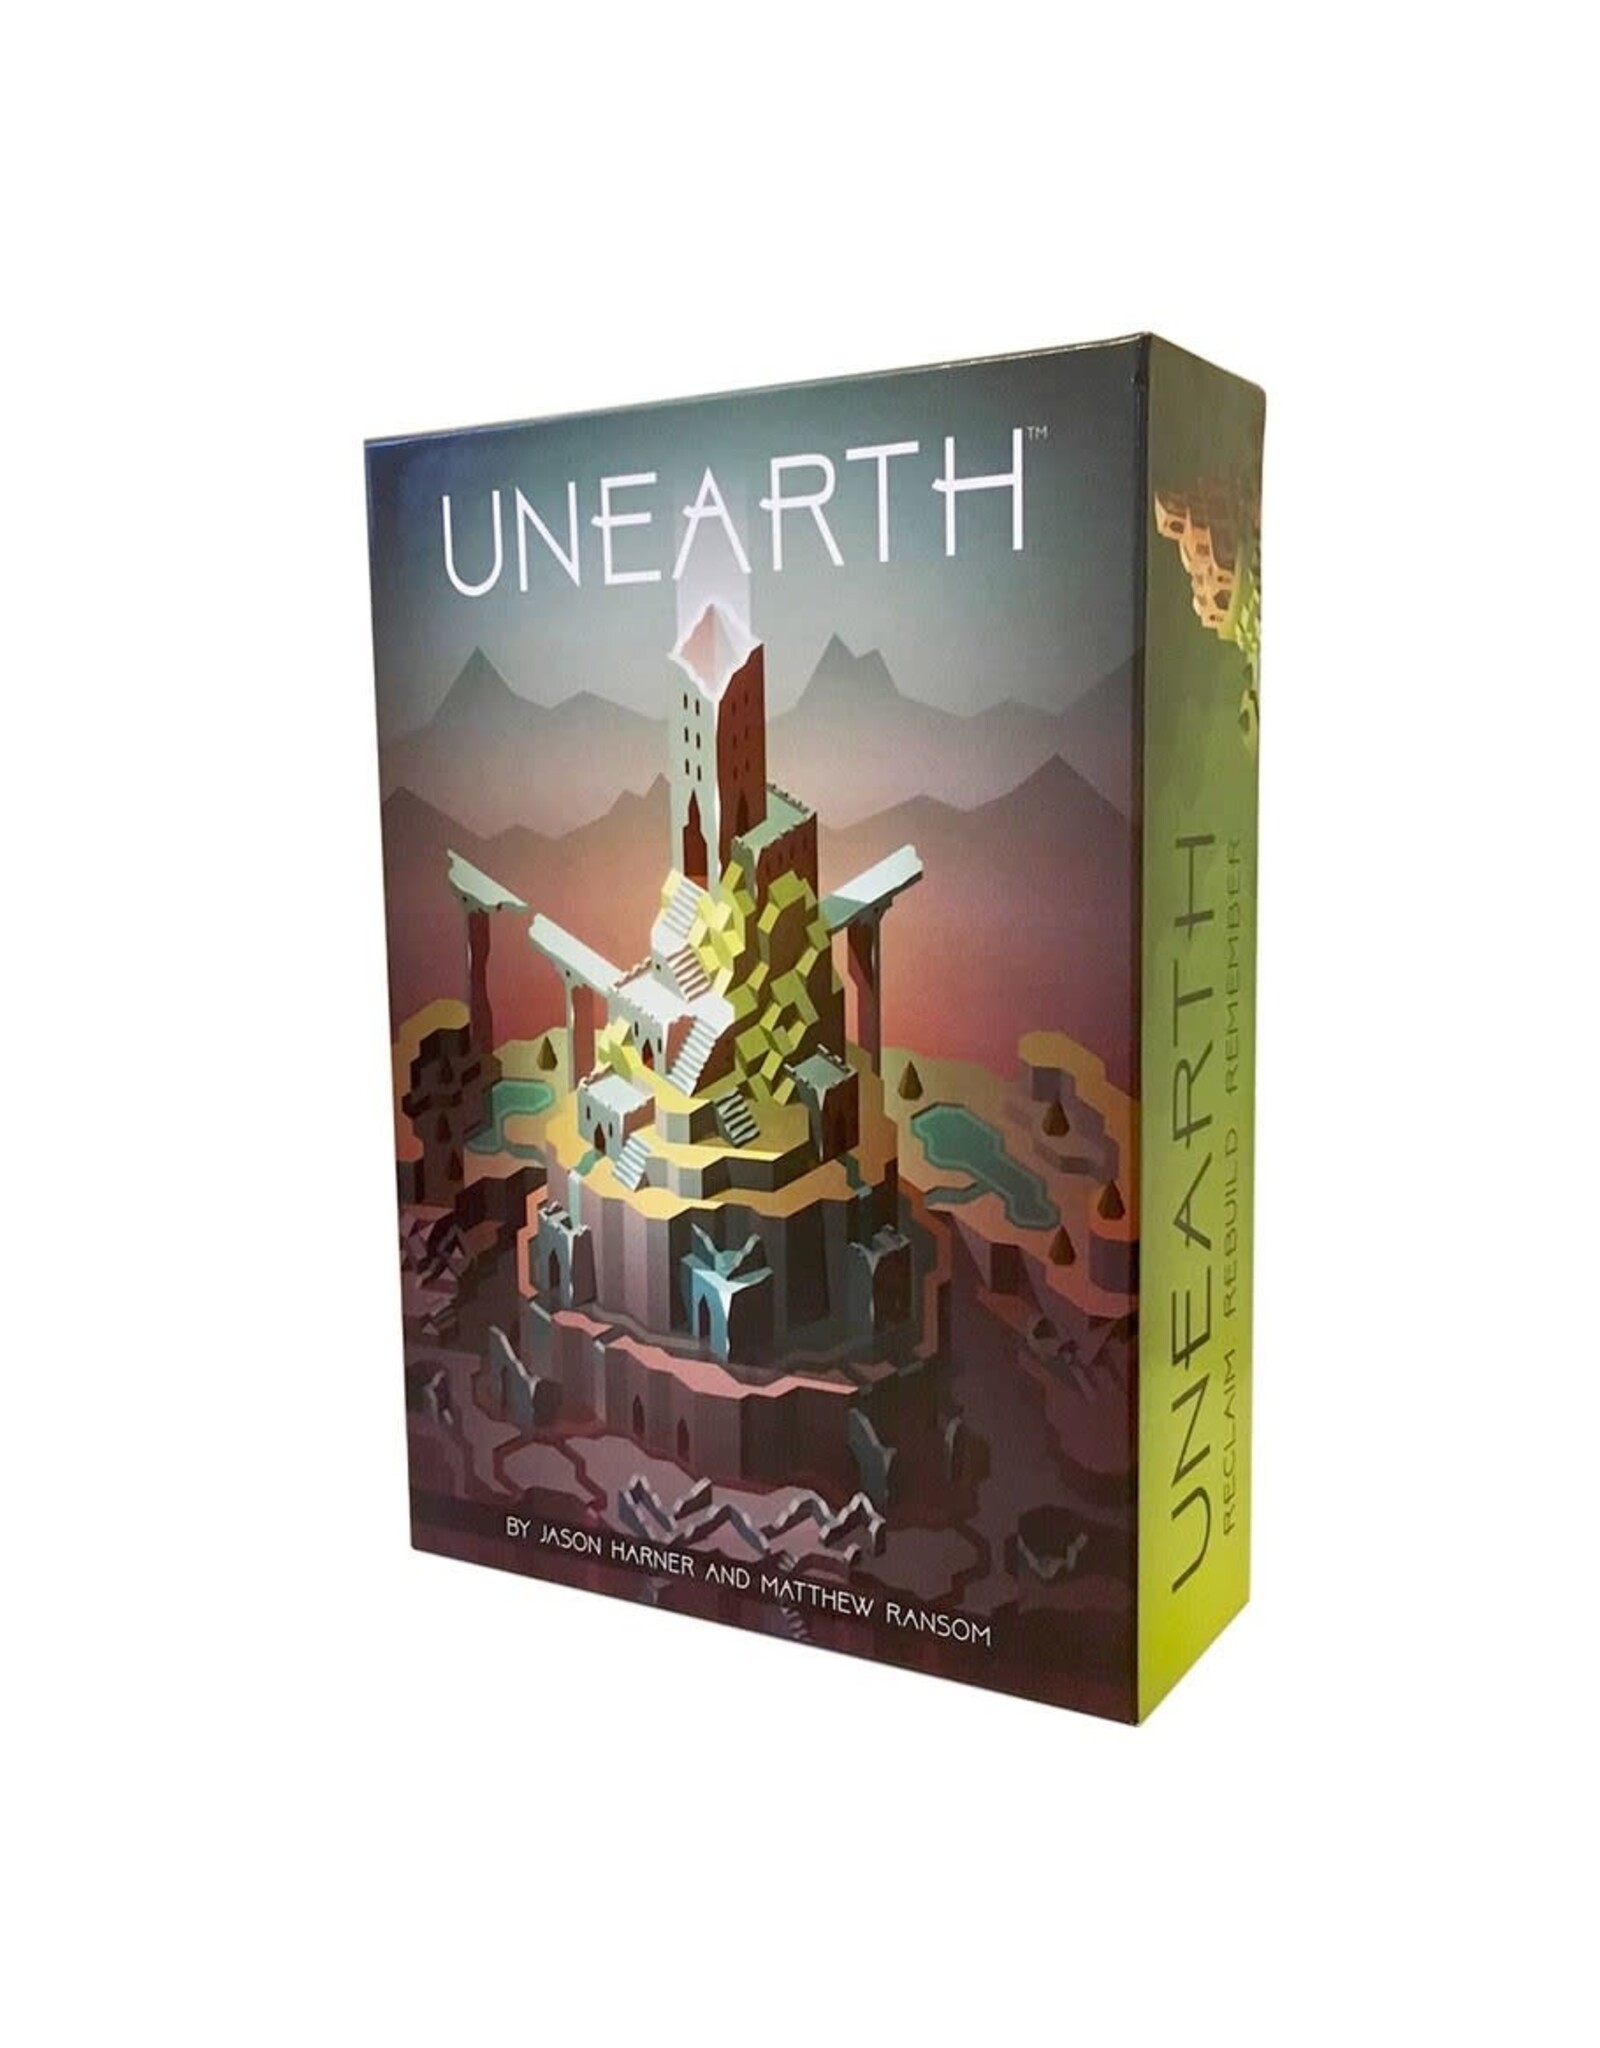 Brotherwise Games Unearth